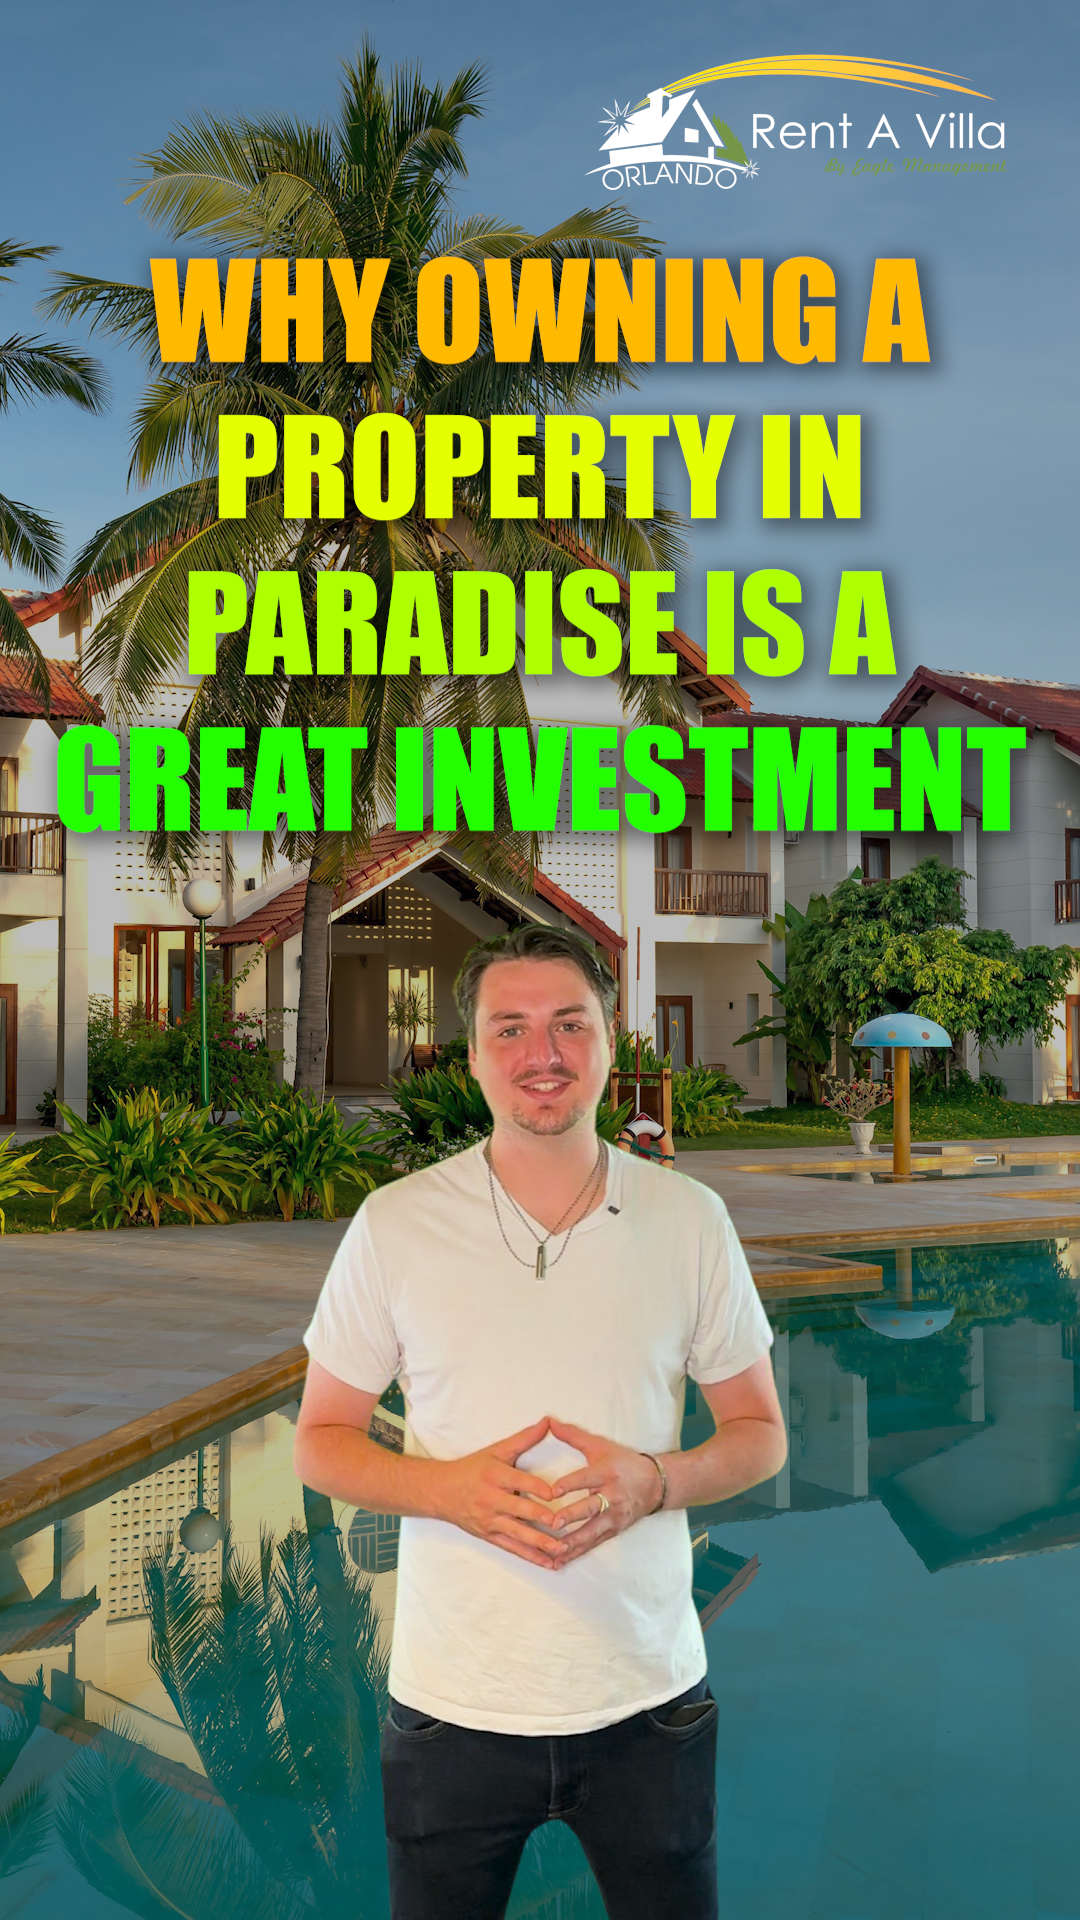 Why owning a property in paradise is a great investment